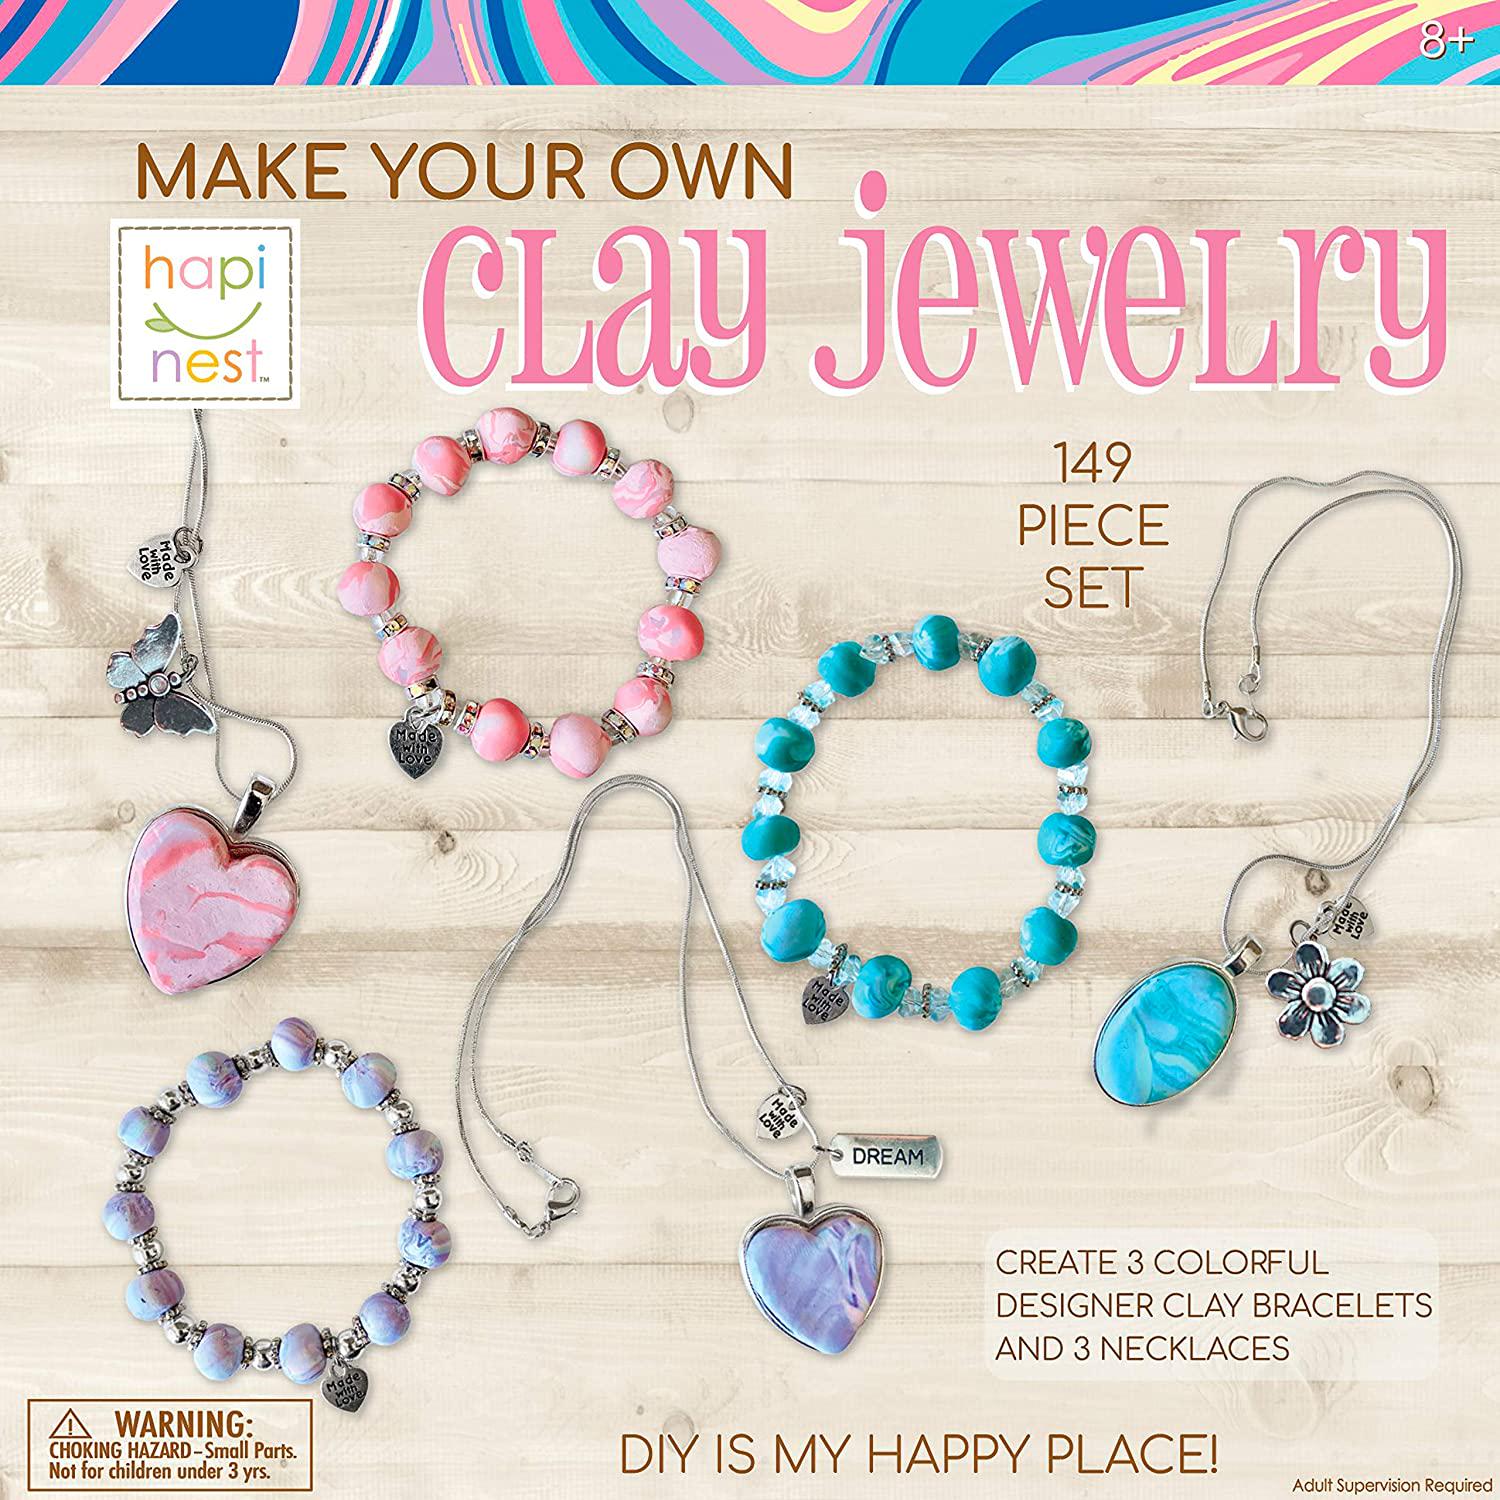 Hapinest, Make Your Own Clay Jewelry Arts and Crafts Kit for Girls Gifts Ages 8 9 10 11 12 Teen Years Old and Up - 3 Bracelets and 3 Necklaces